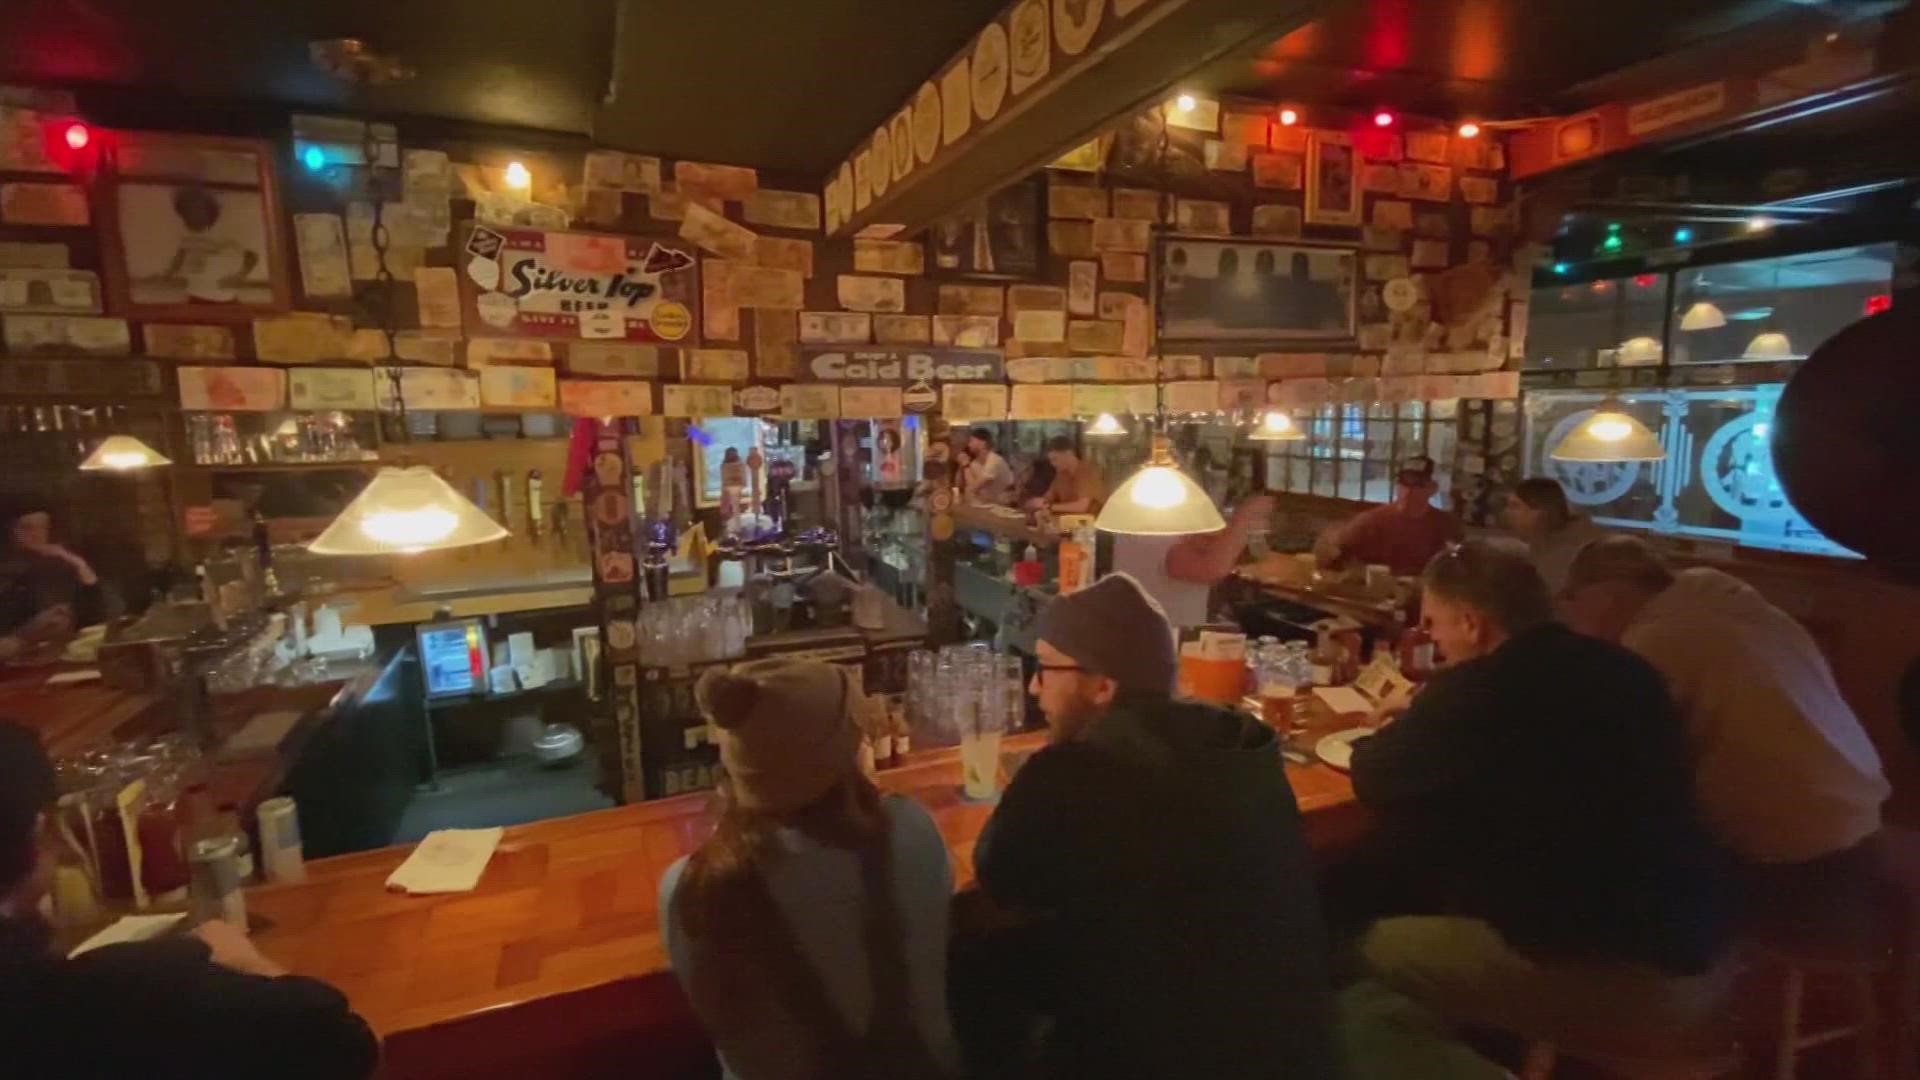 'Blackout Wednesday,' the day before Thanksgiving, is a big drinking day. The Great Lost Bear and $3 Dewey's in Portland both say they are prepared for large crowds.